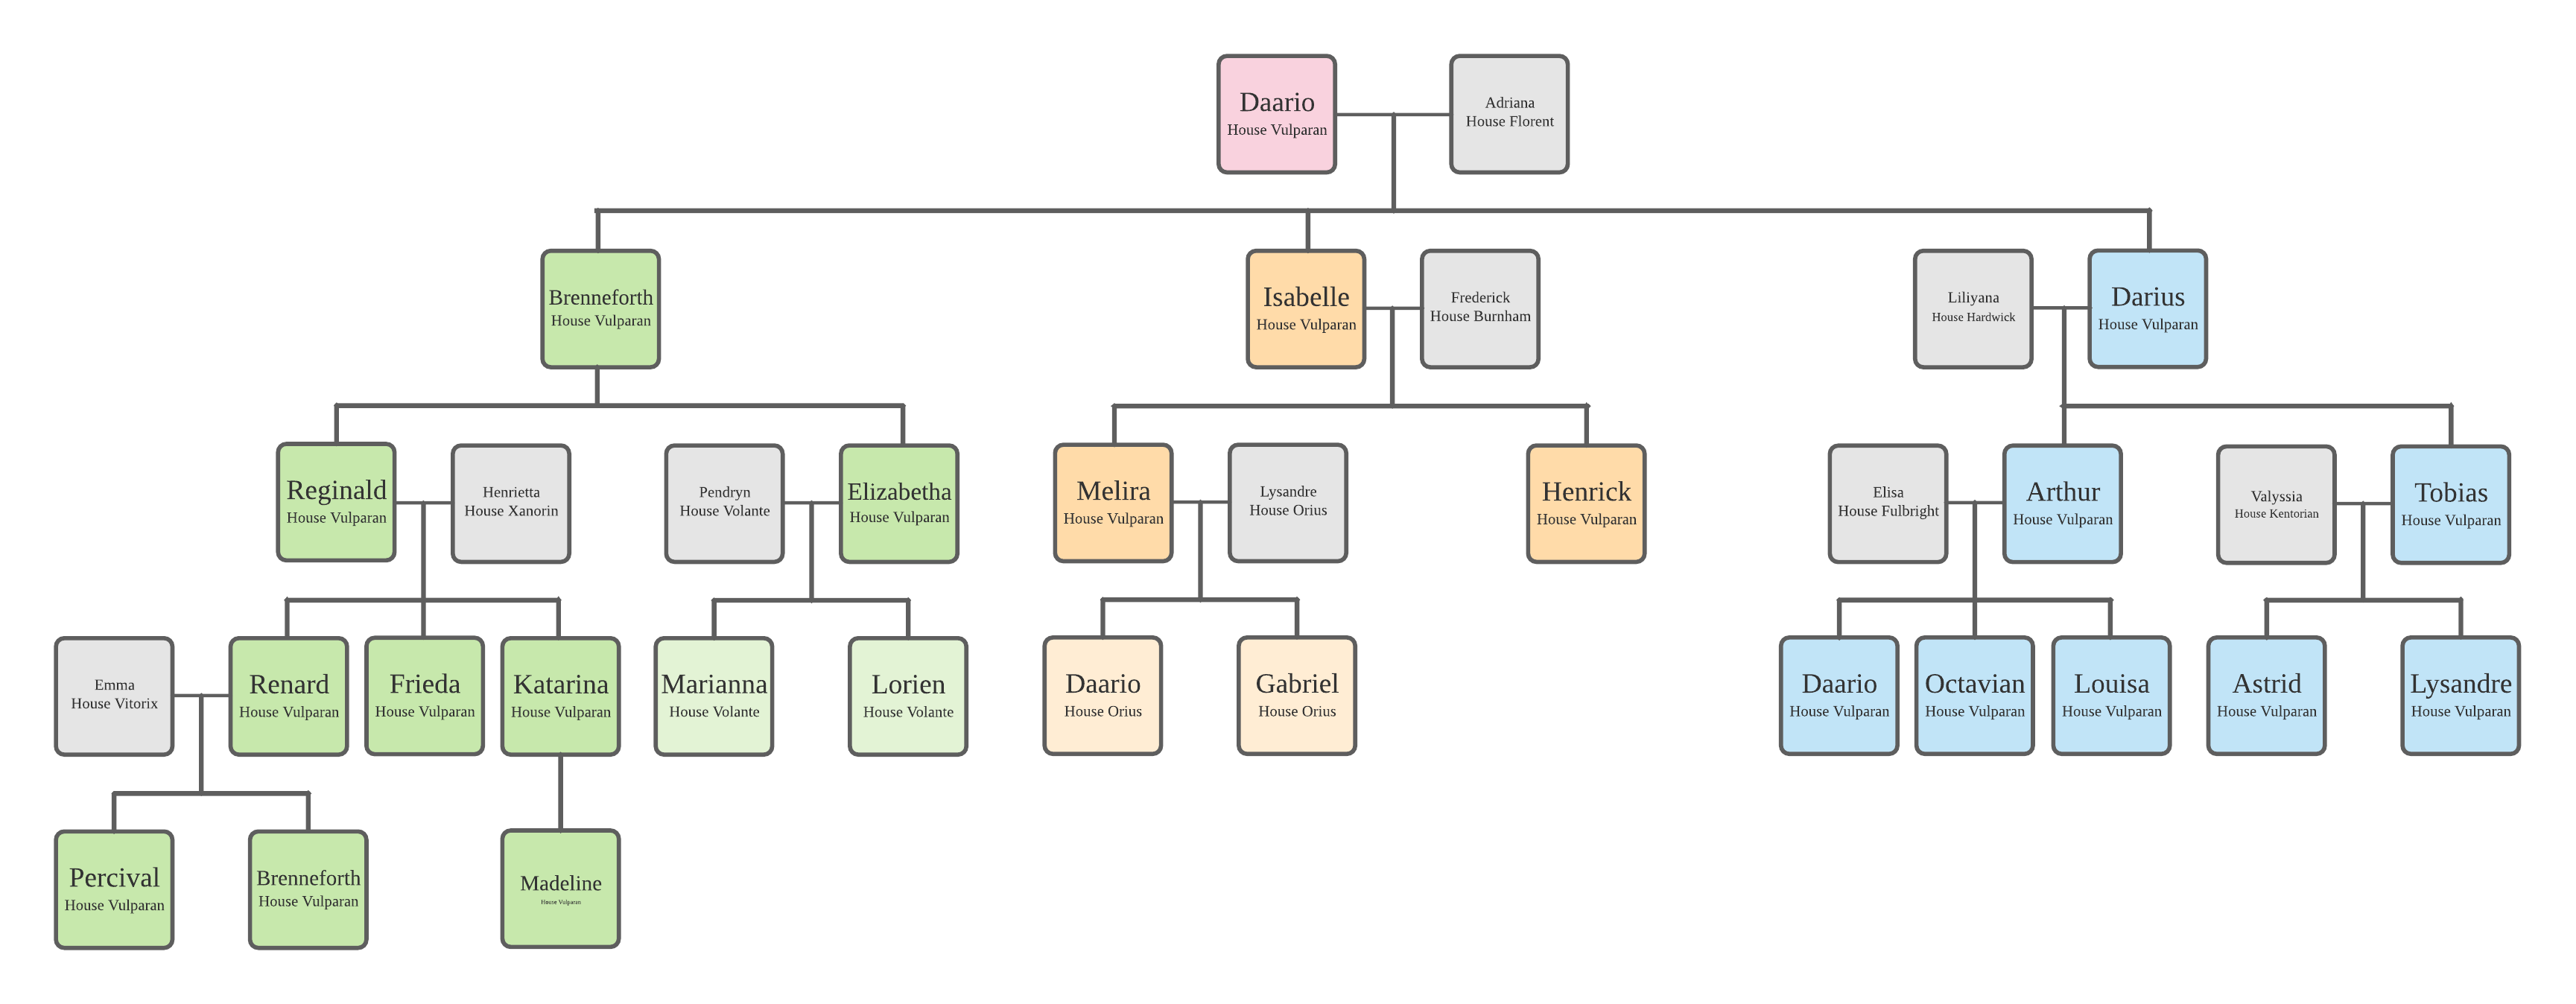 The Family Tree of House Vulparan, stemming from Daario 'the Wise' of House Vulapran